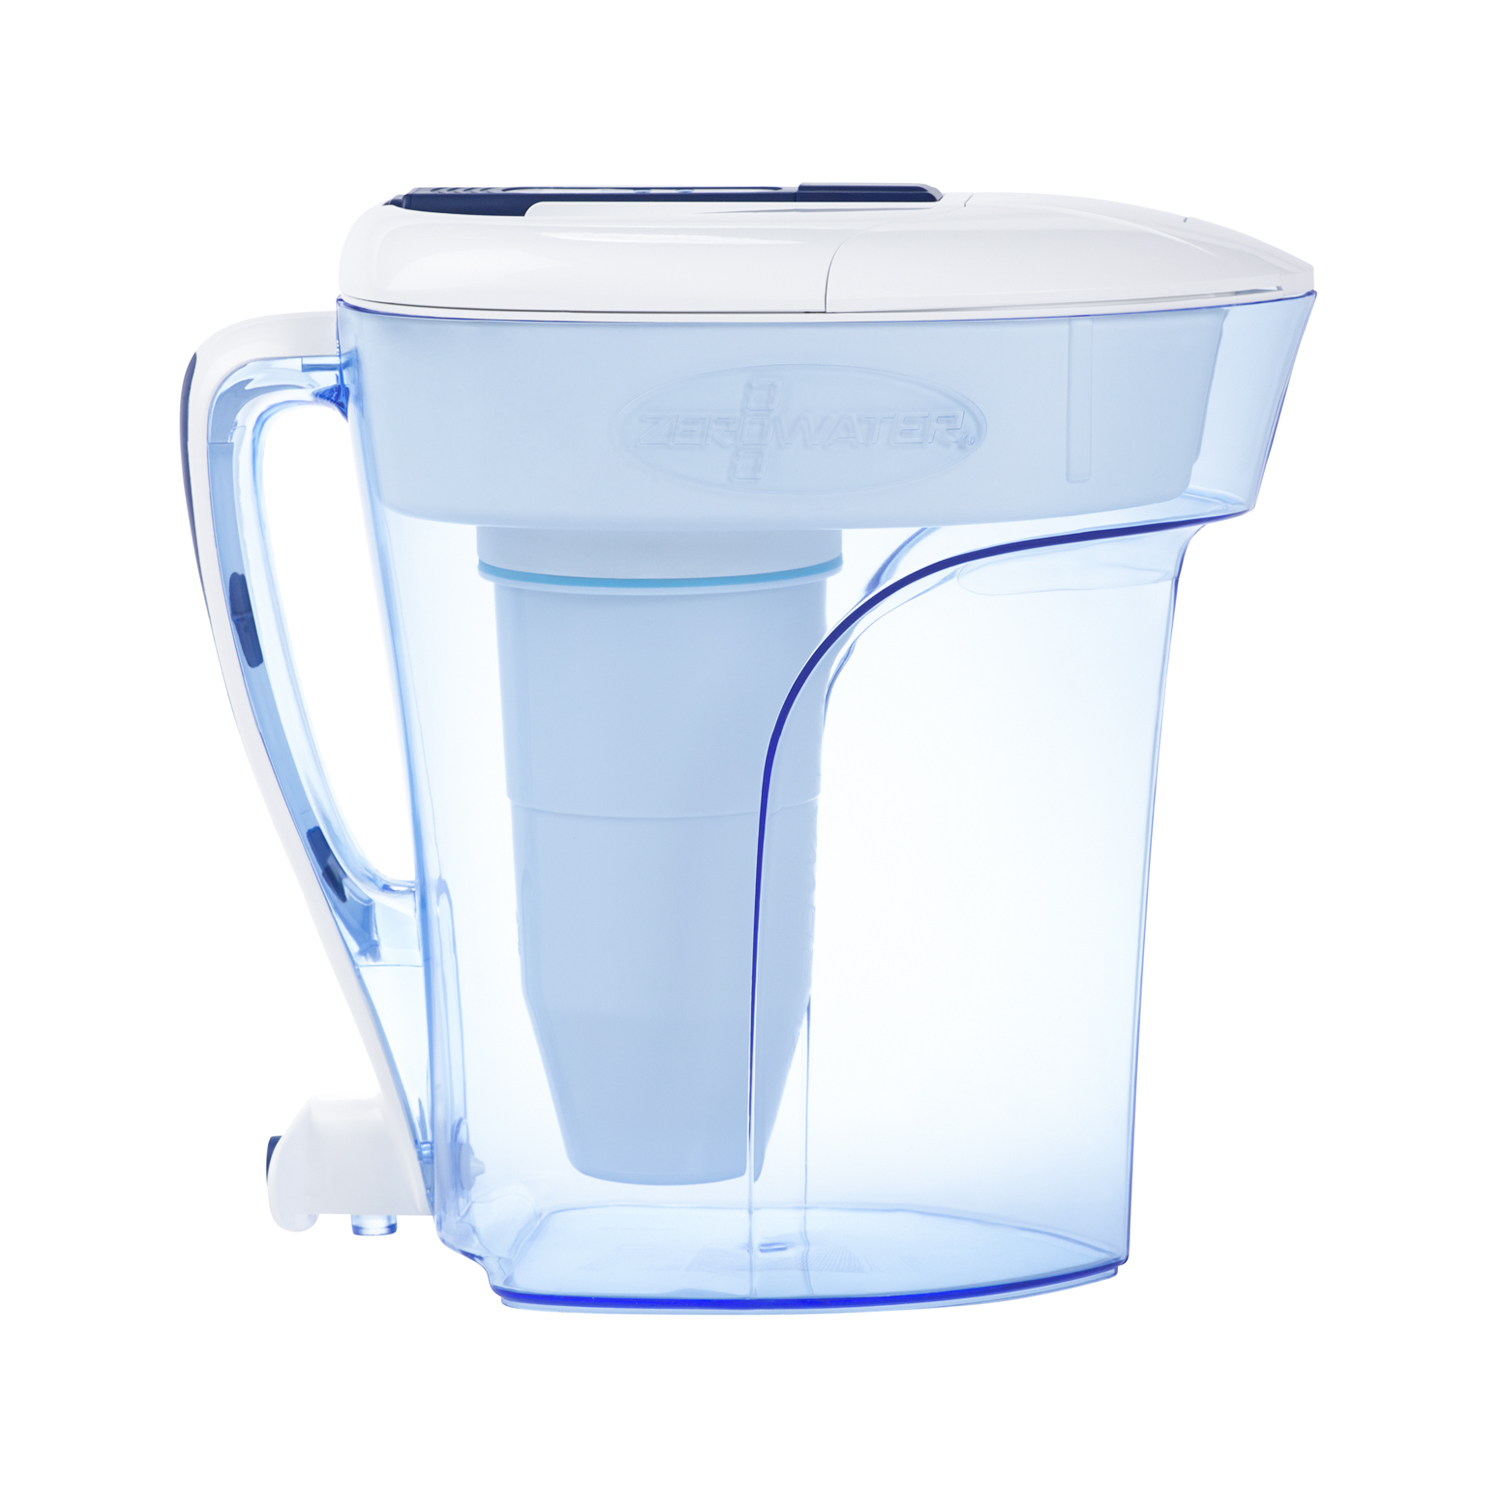 12 cup ready pour pitcher side view